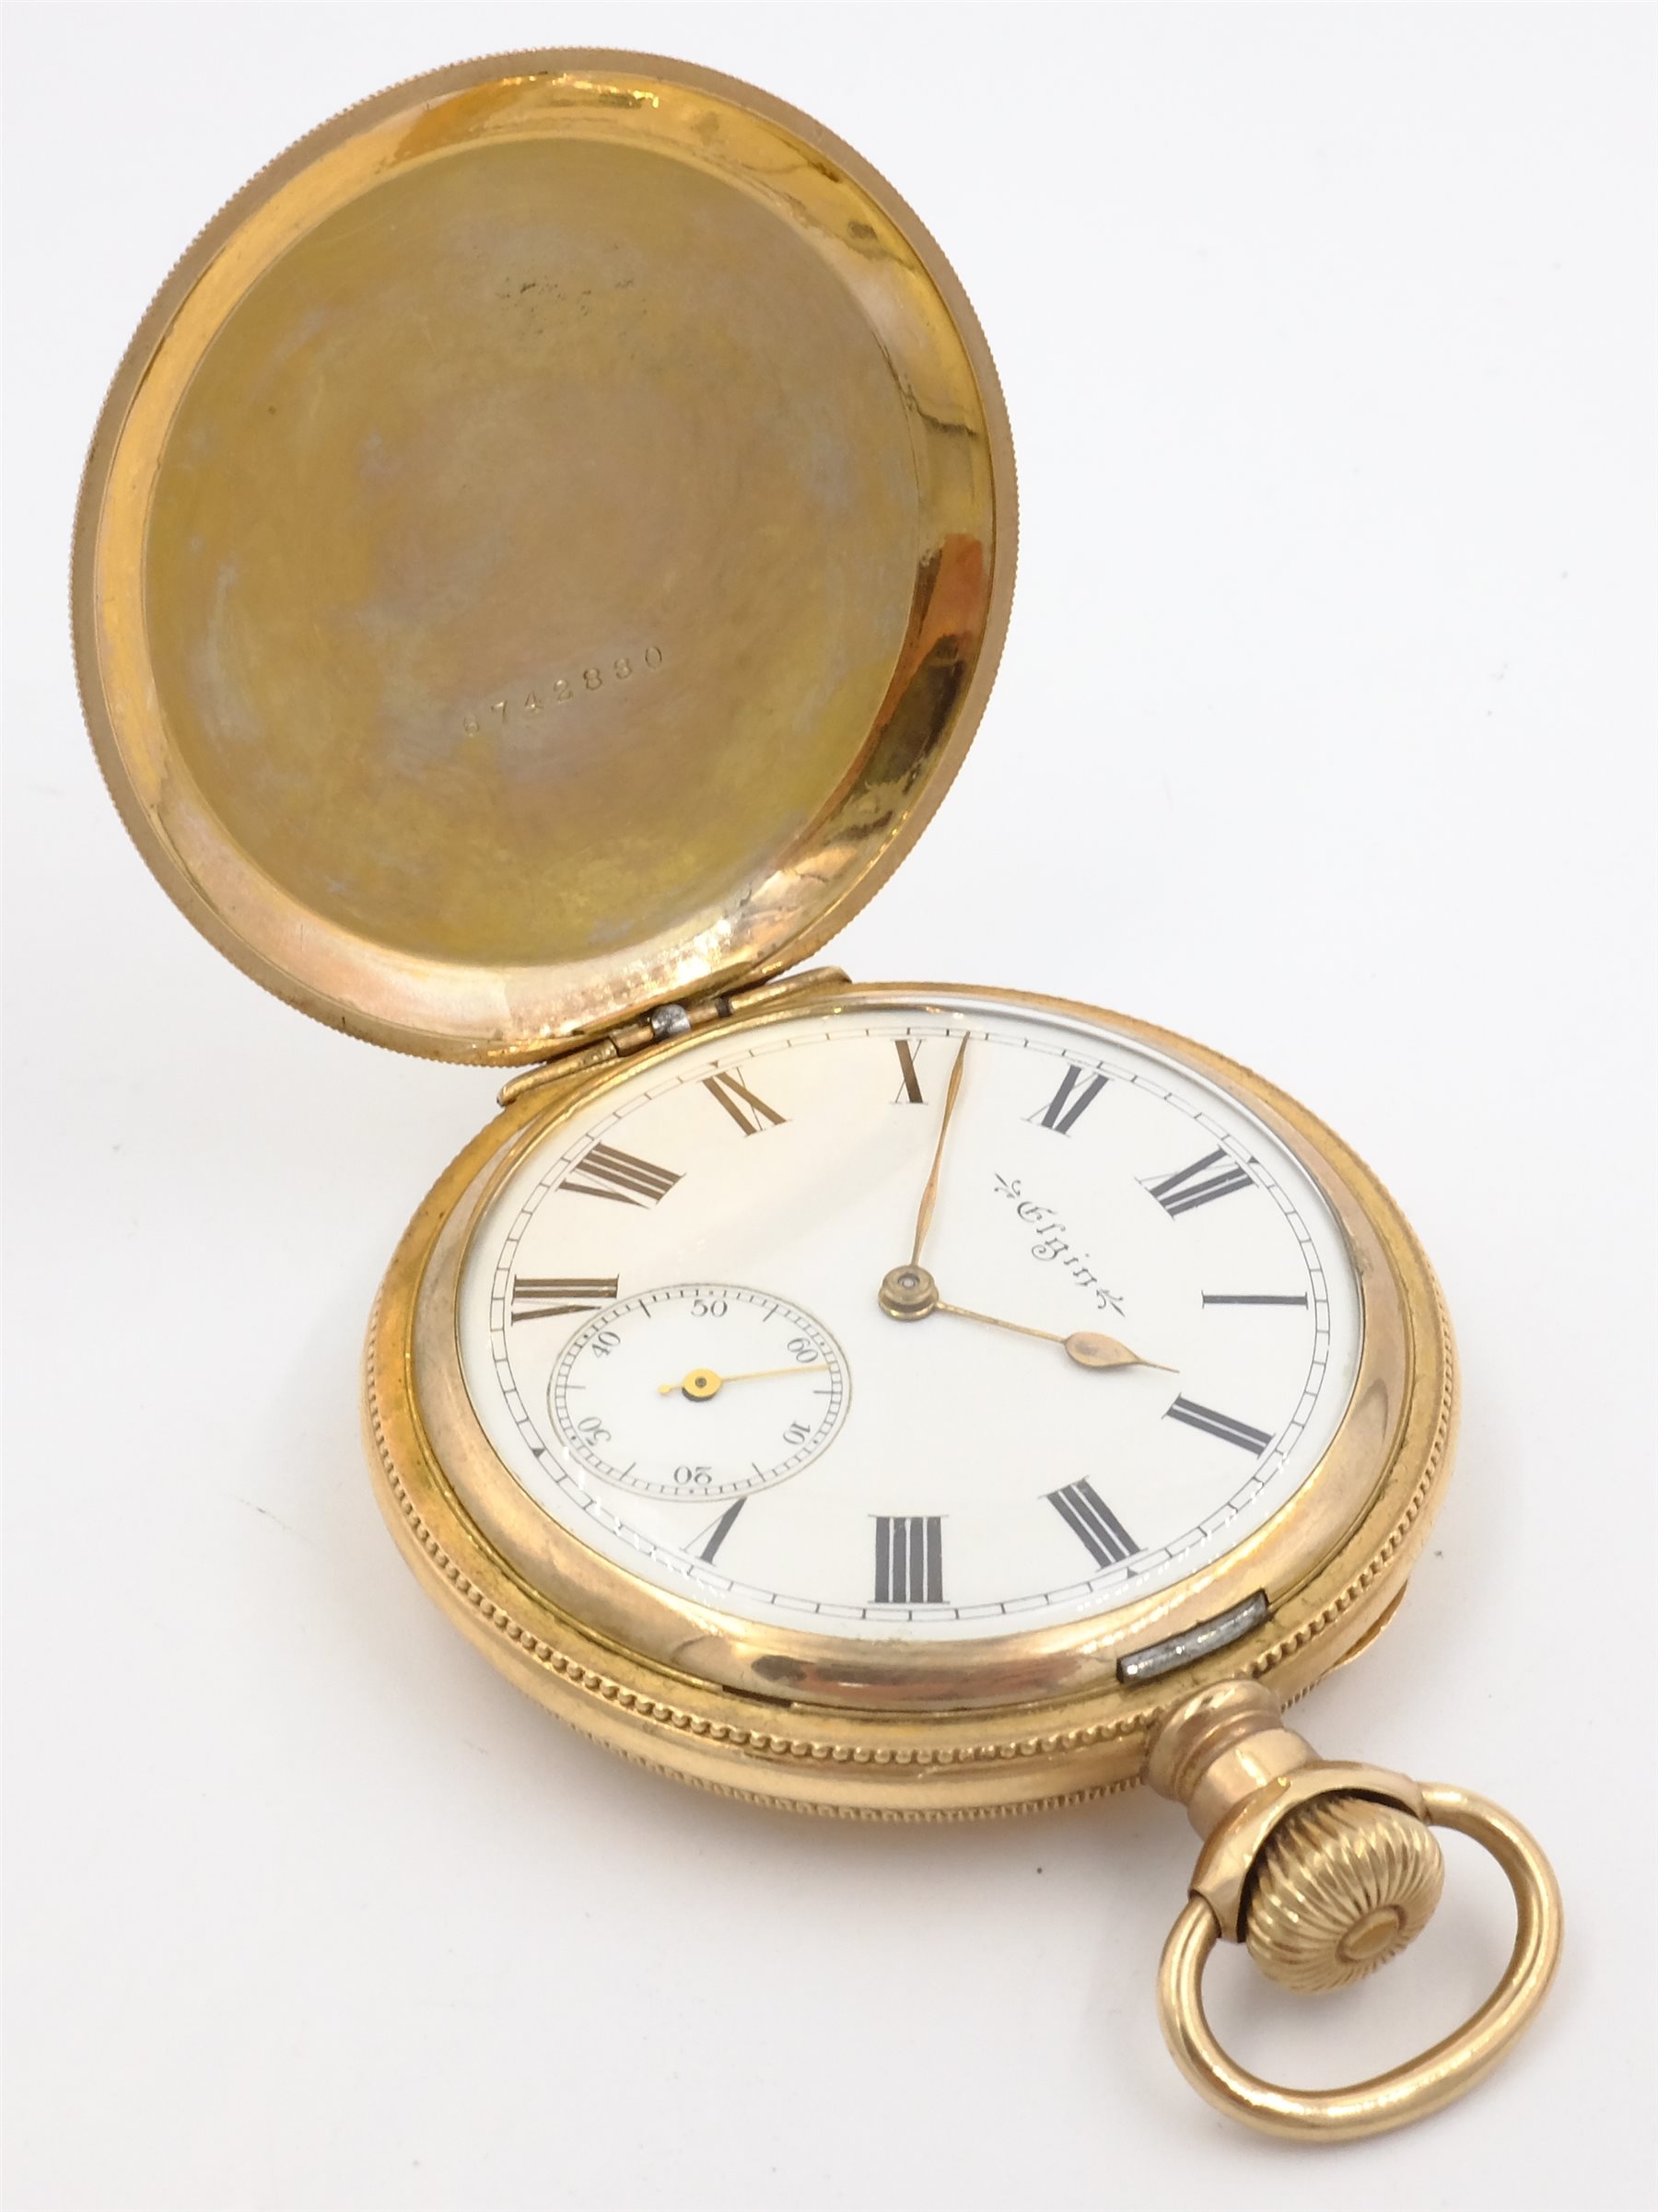 Gold-plated pocket watch by Waltham, gold-plated pocket watch by H. Lee ...